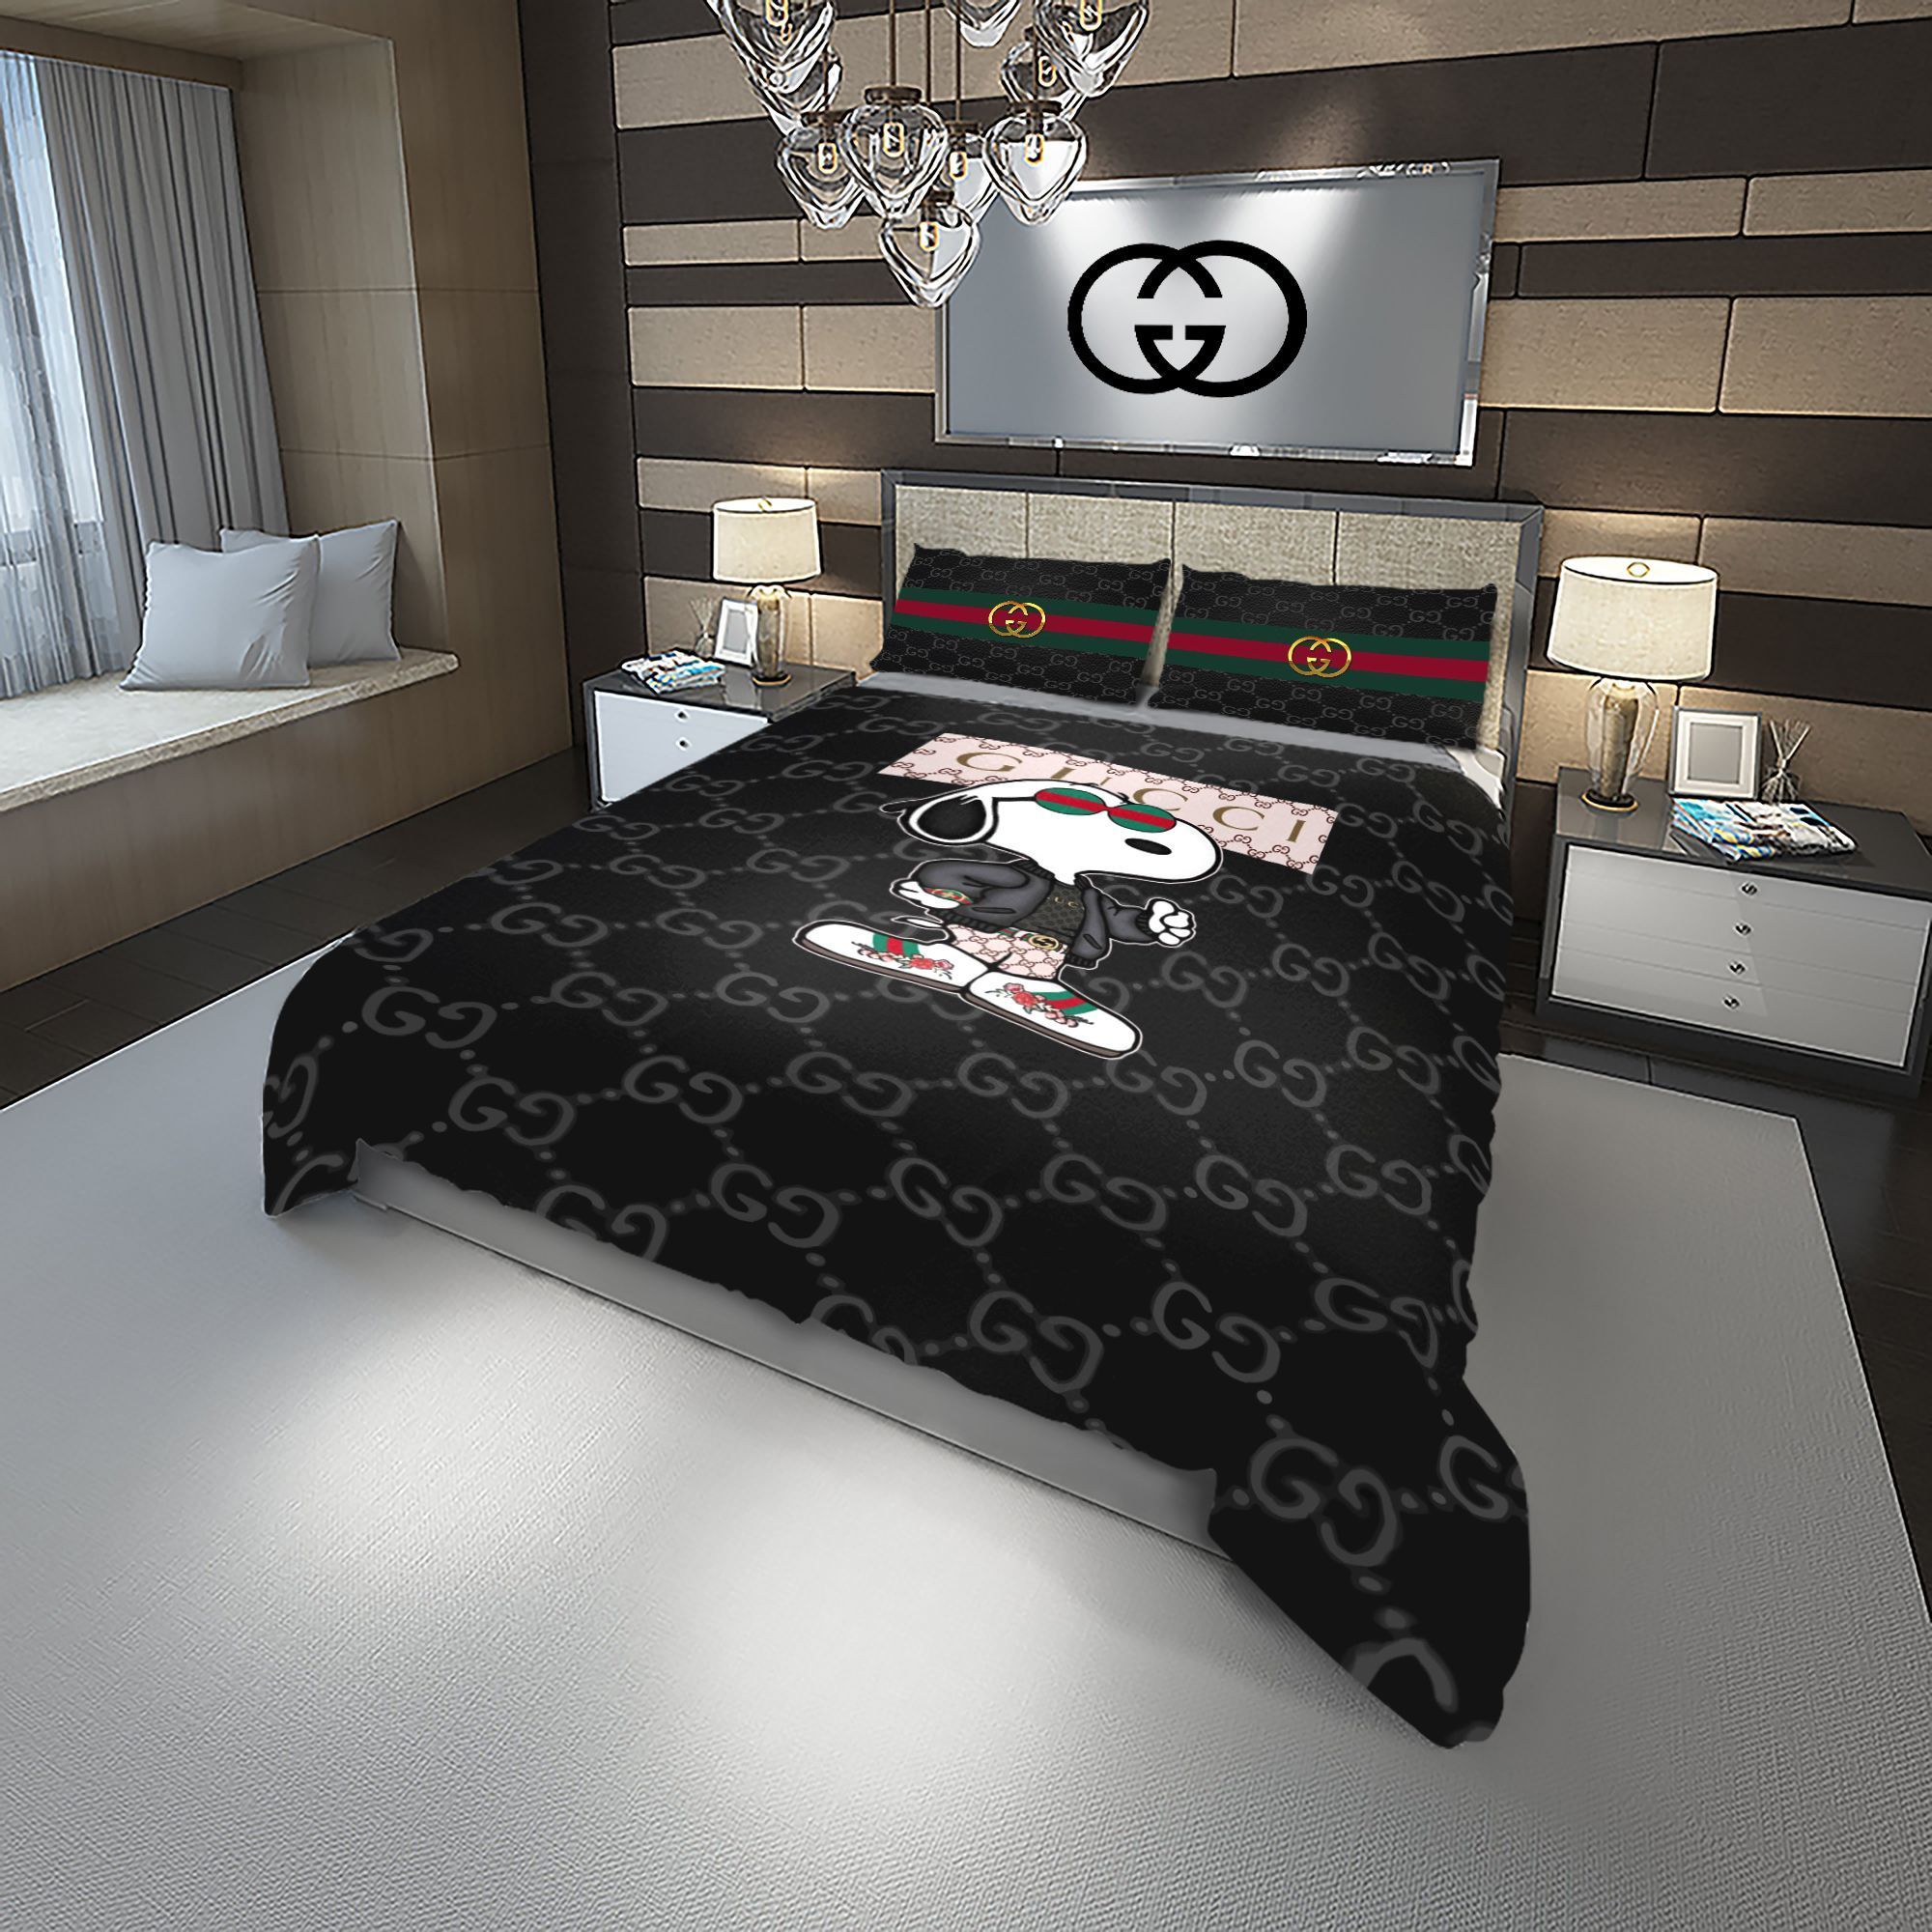 Let me show you about some luxury brand bedding set 2022 179